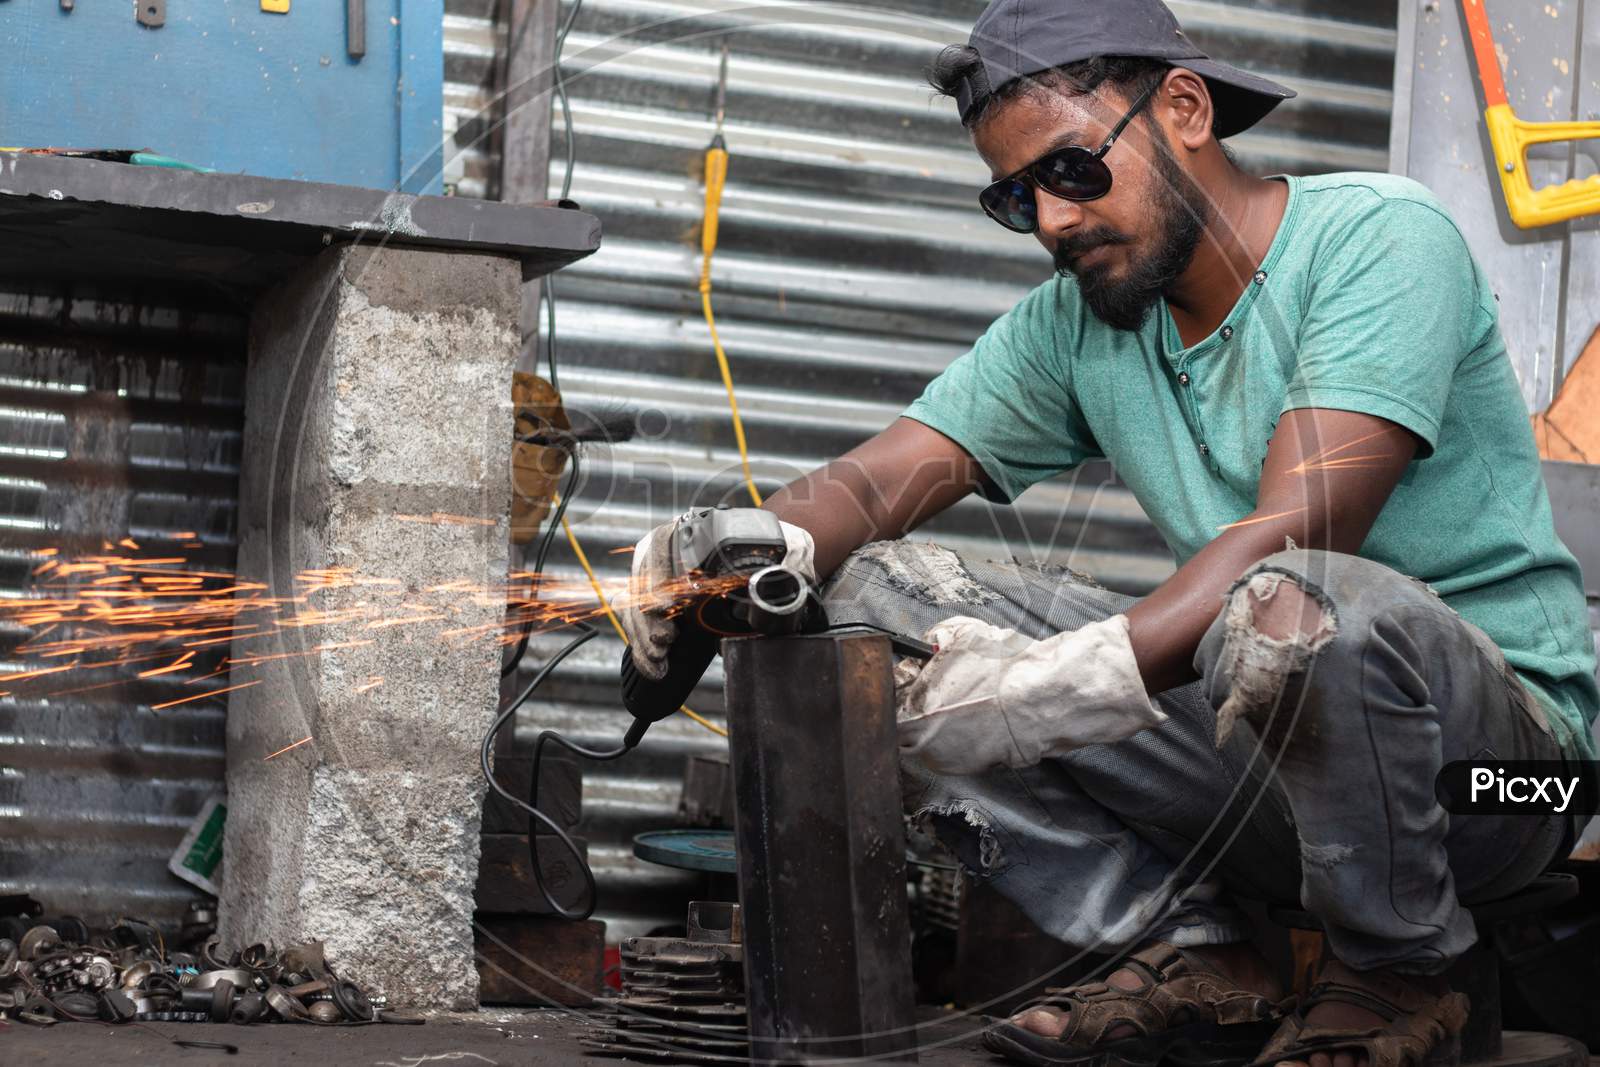 A Young Welder Cutting a Metal Piece with Goggles